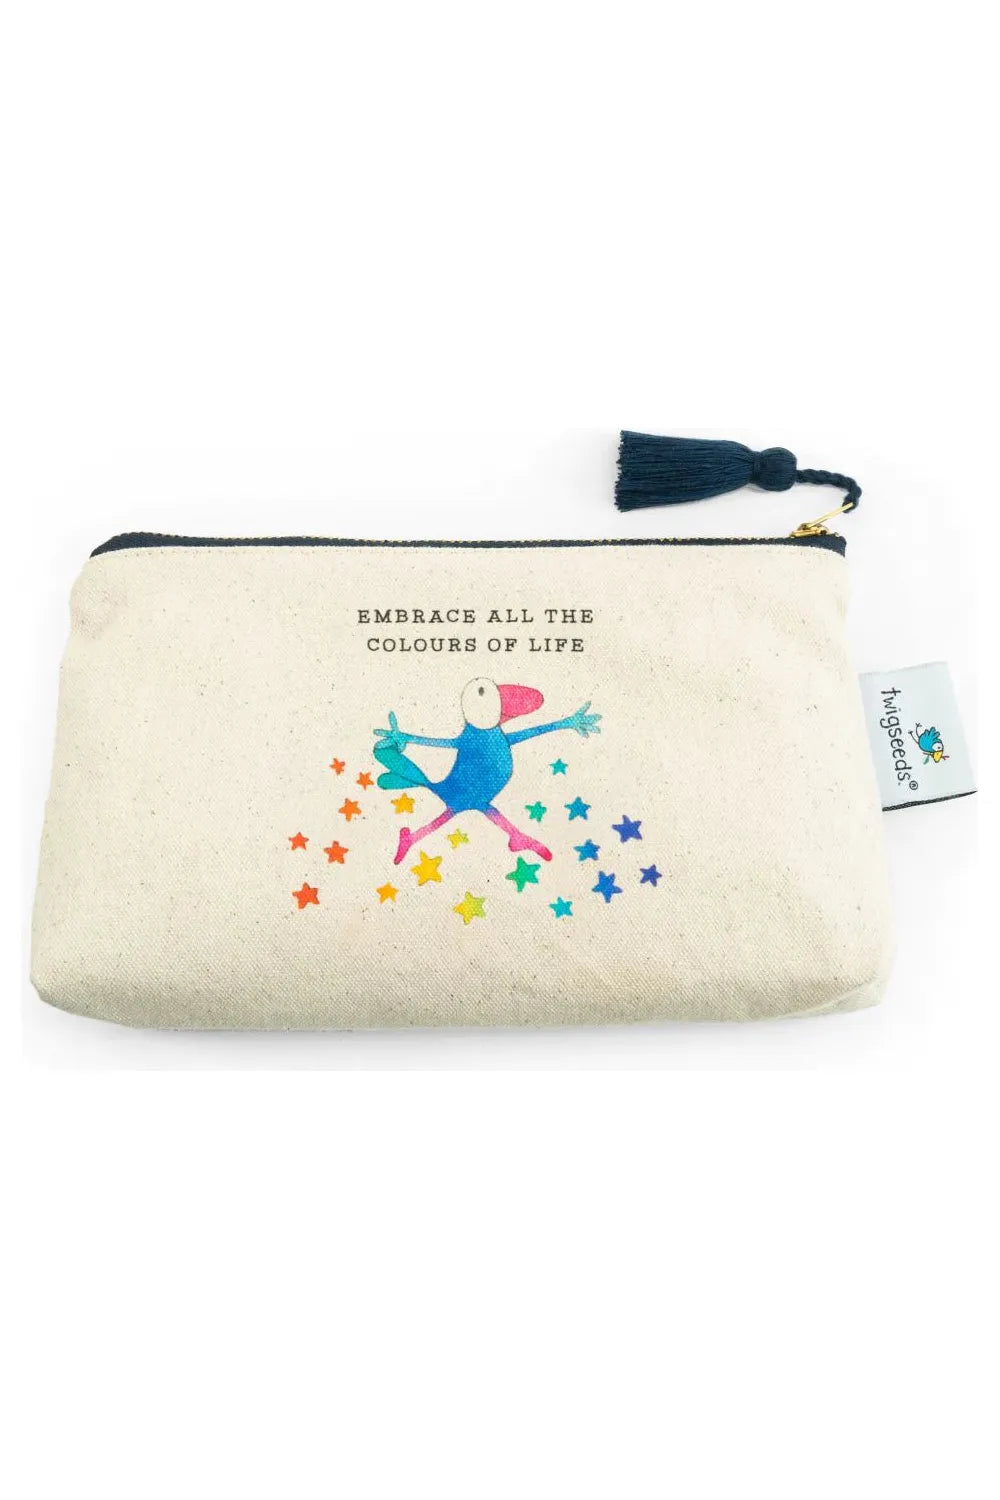 Twigseeds Pouch - Embrance the Colours of Life